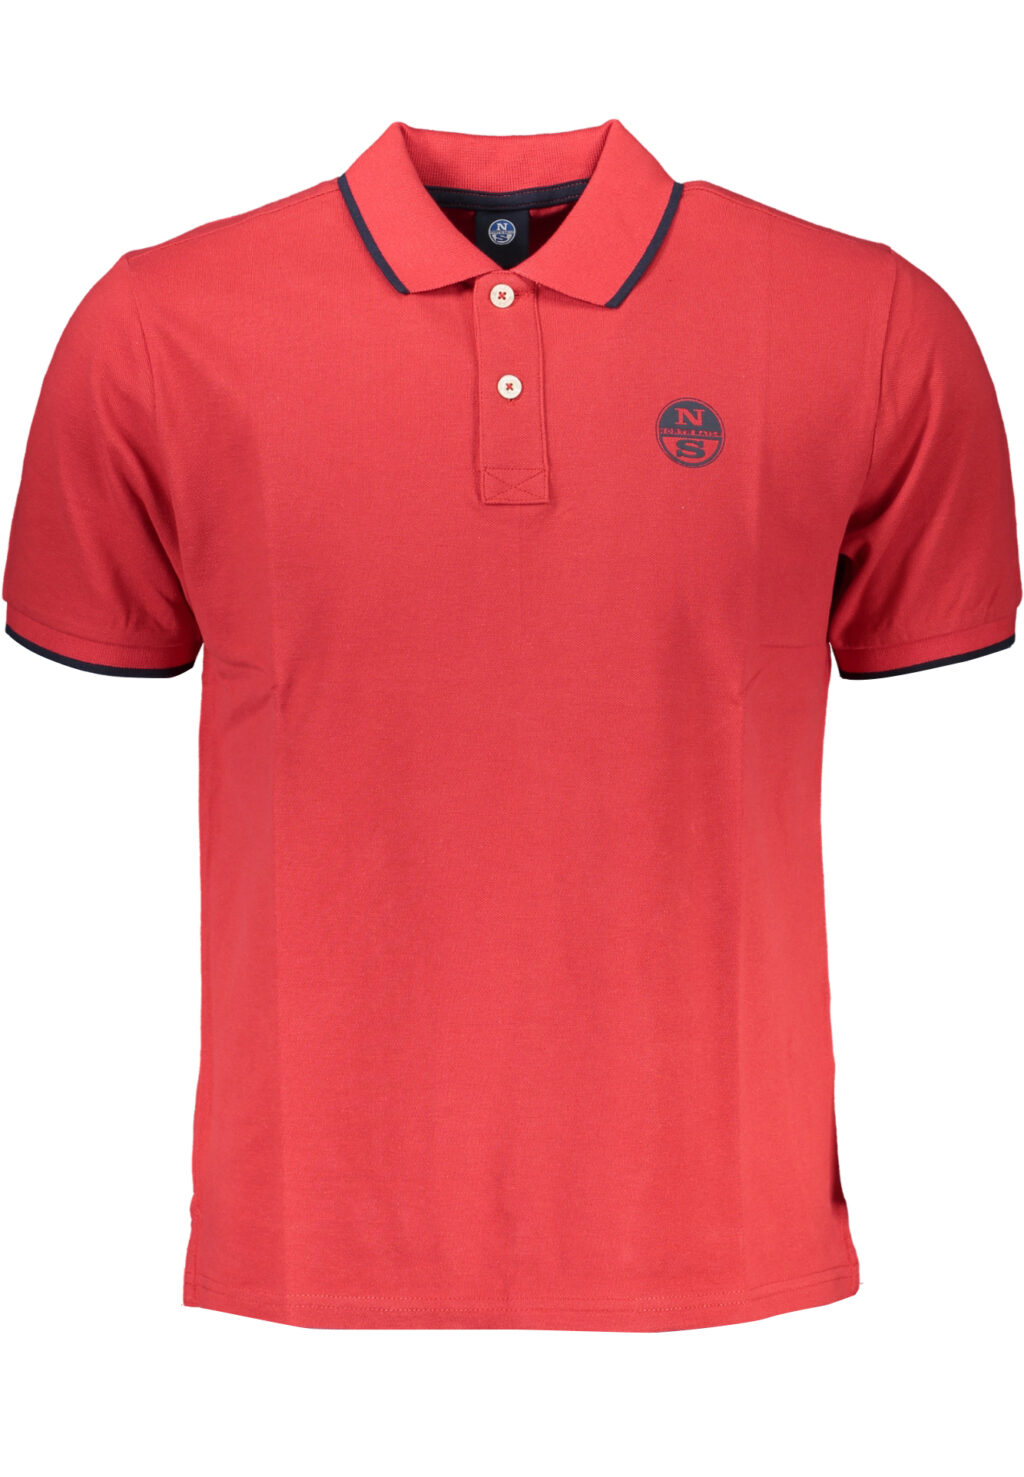 NORTH SAILS MEN'S RED SHORT SLEEVED POLO SHIRT 902830000_RO0230